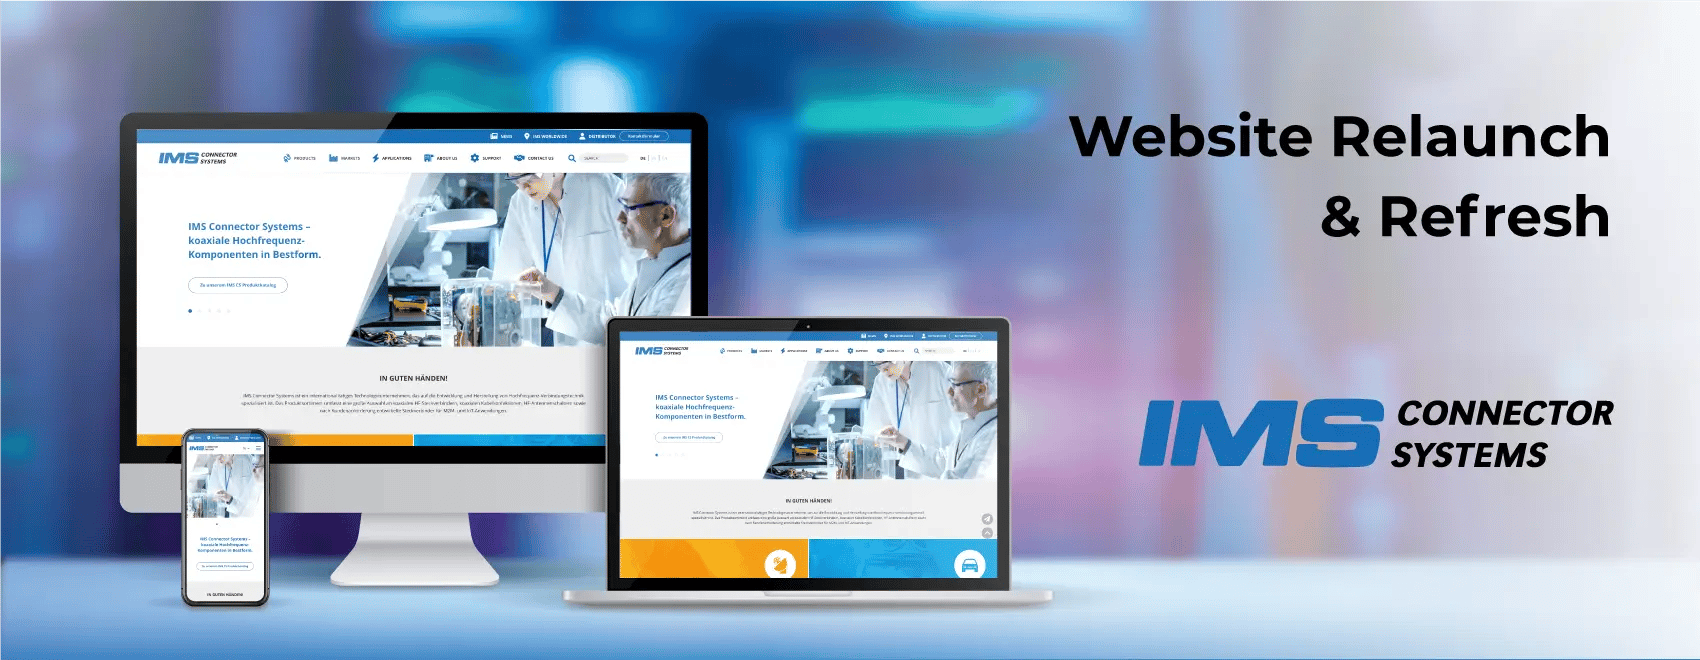 W4 reference story - website relaunch and refresh for IMS